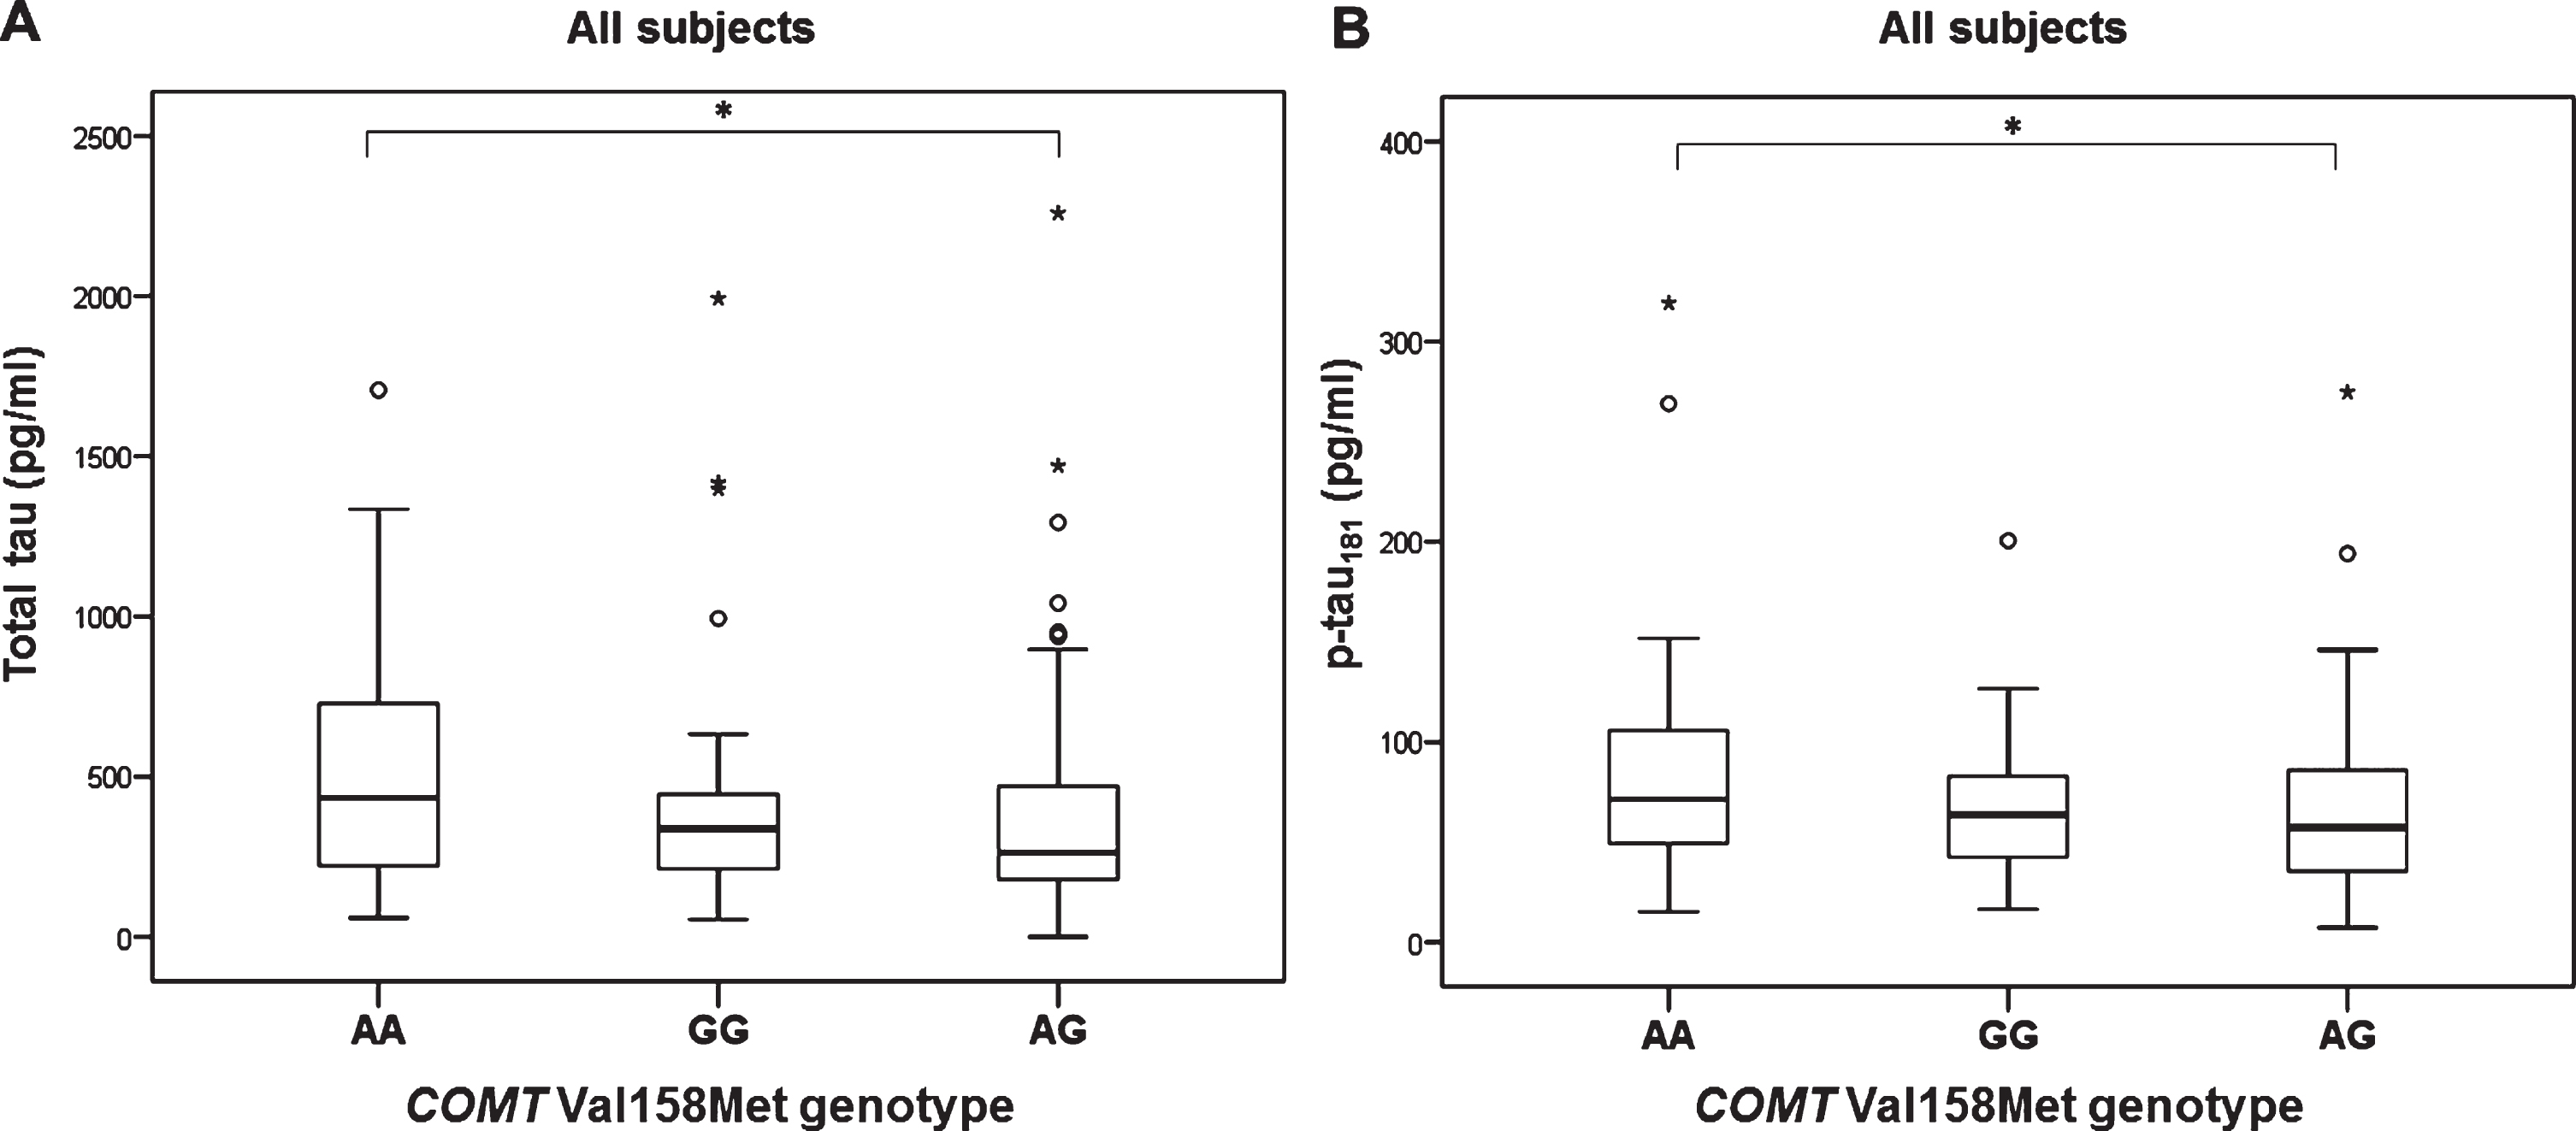 Levels of A) t-tau and B) p-tau181 in patients with different COMT Val158Met genotype. *p < 0.05.